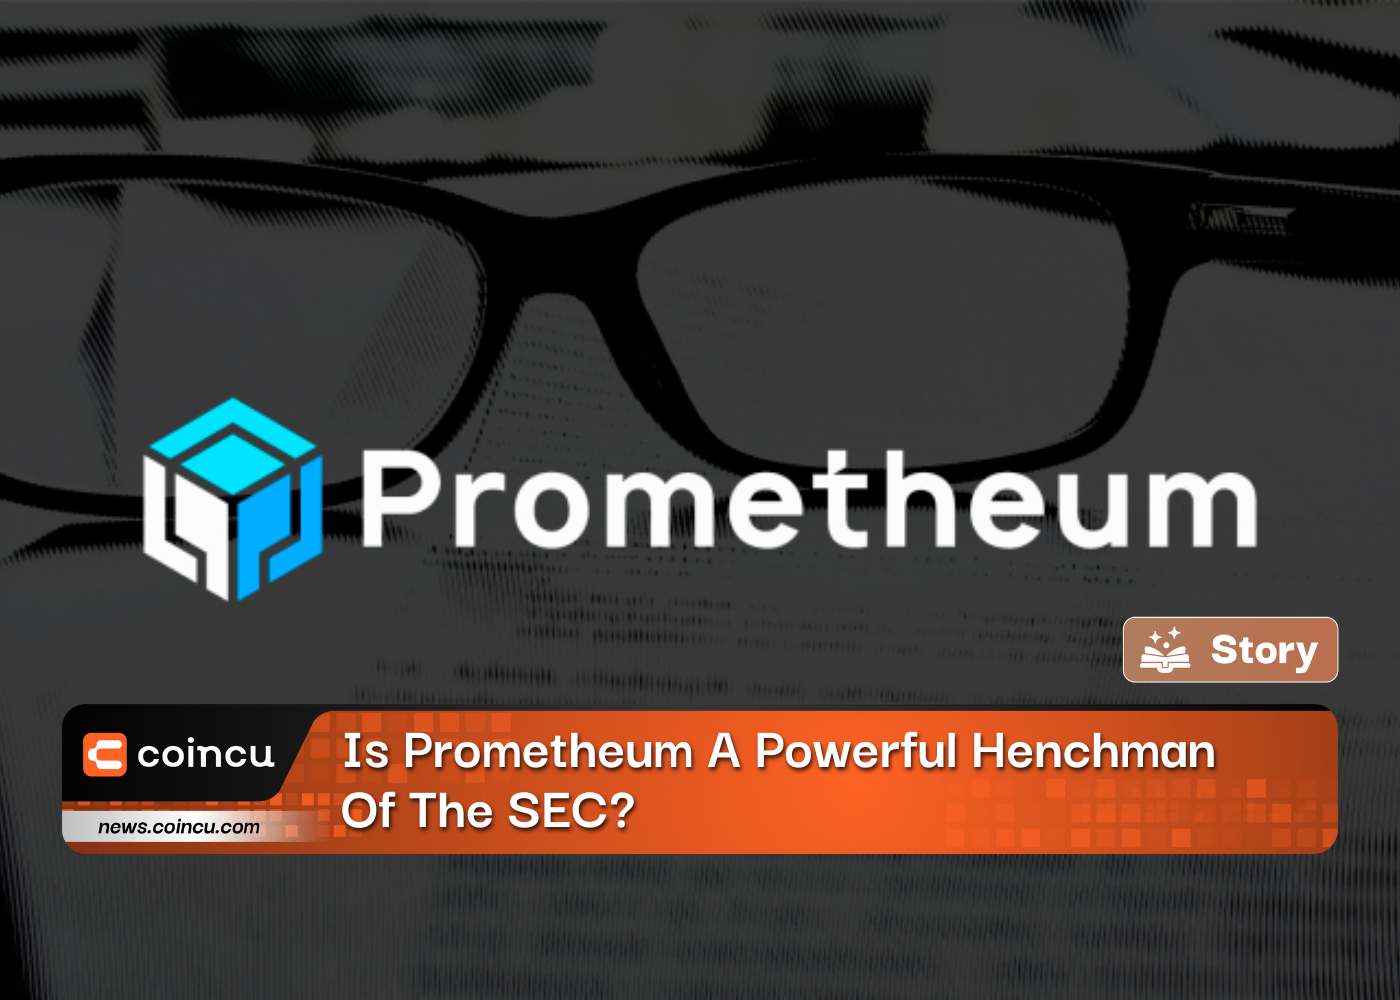 Is Prometheum A Powerful Henchman Of The SEC?